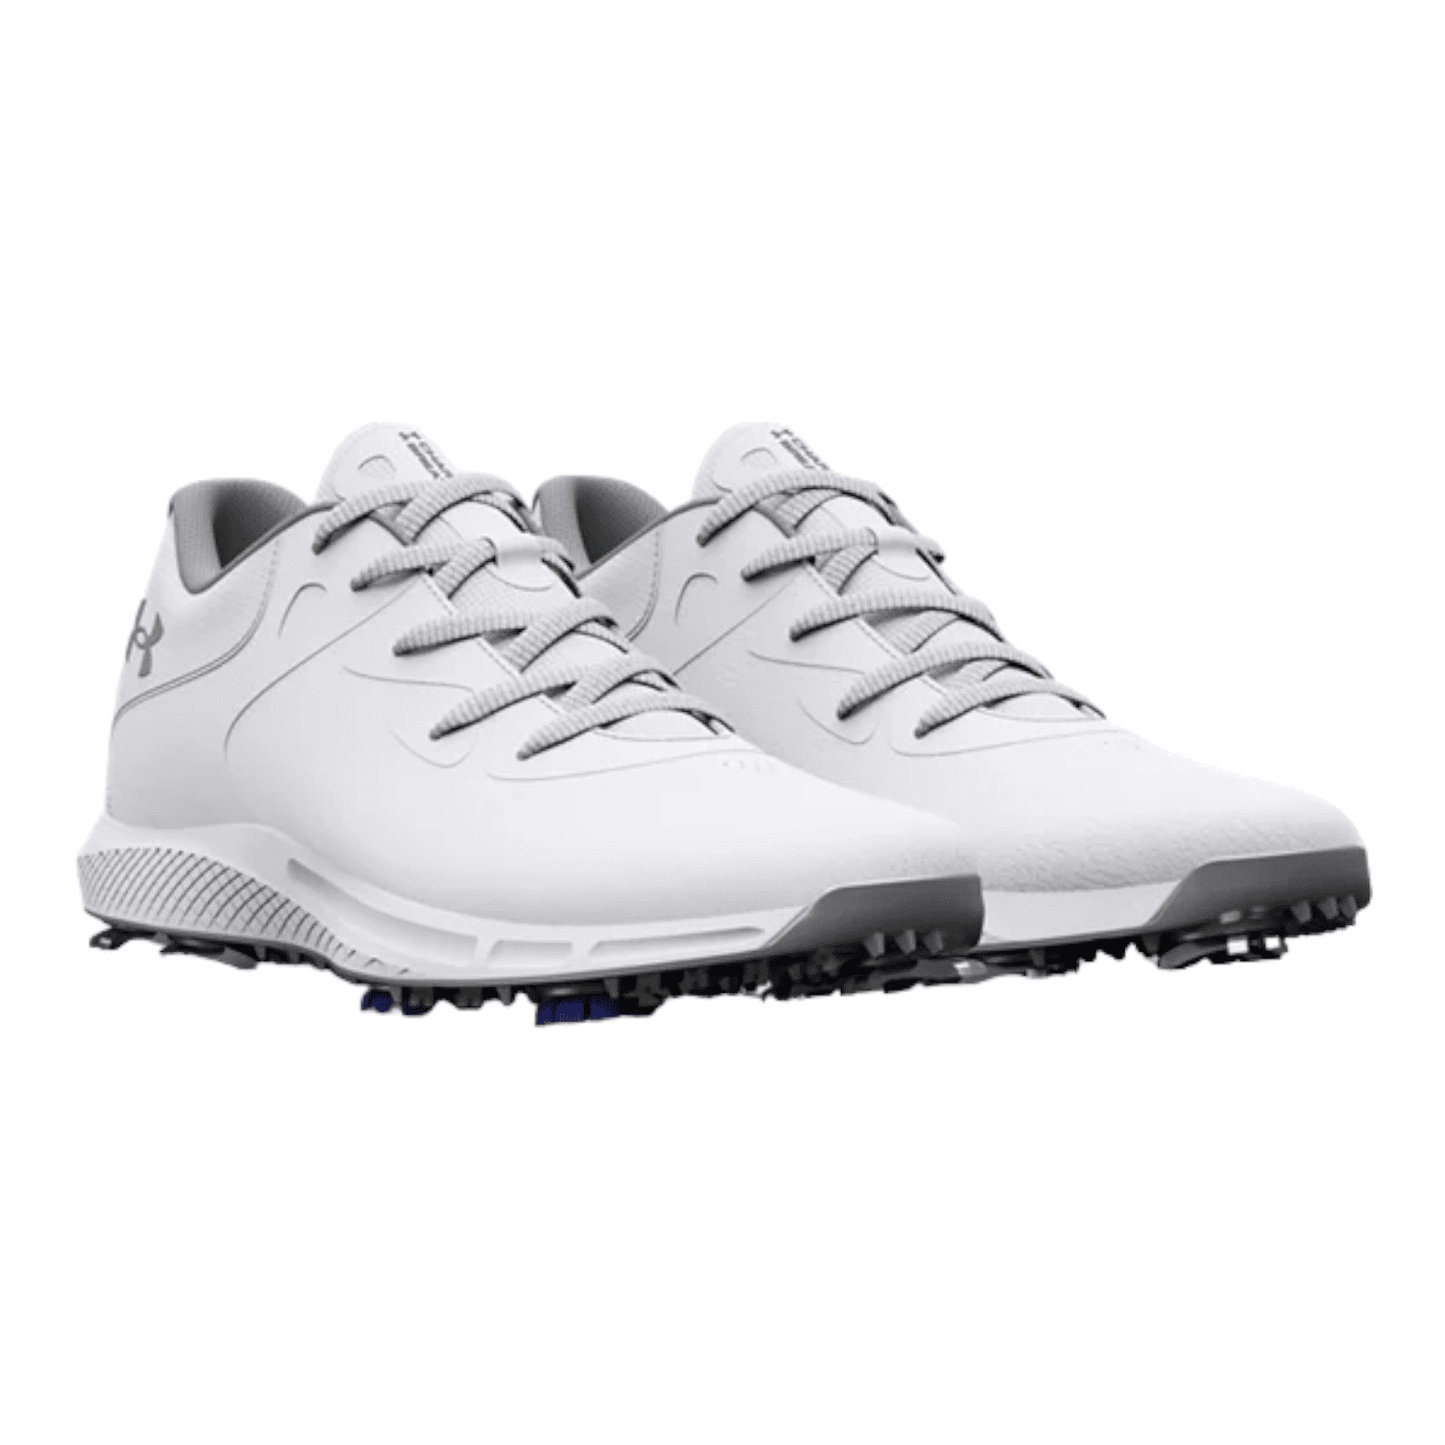 Under Armour Ladies Charged Breathe 2 Golf Shoes 3026406